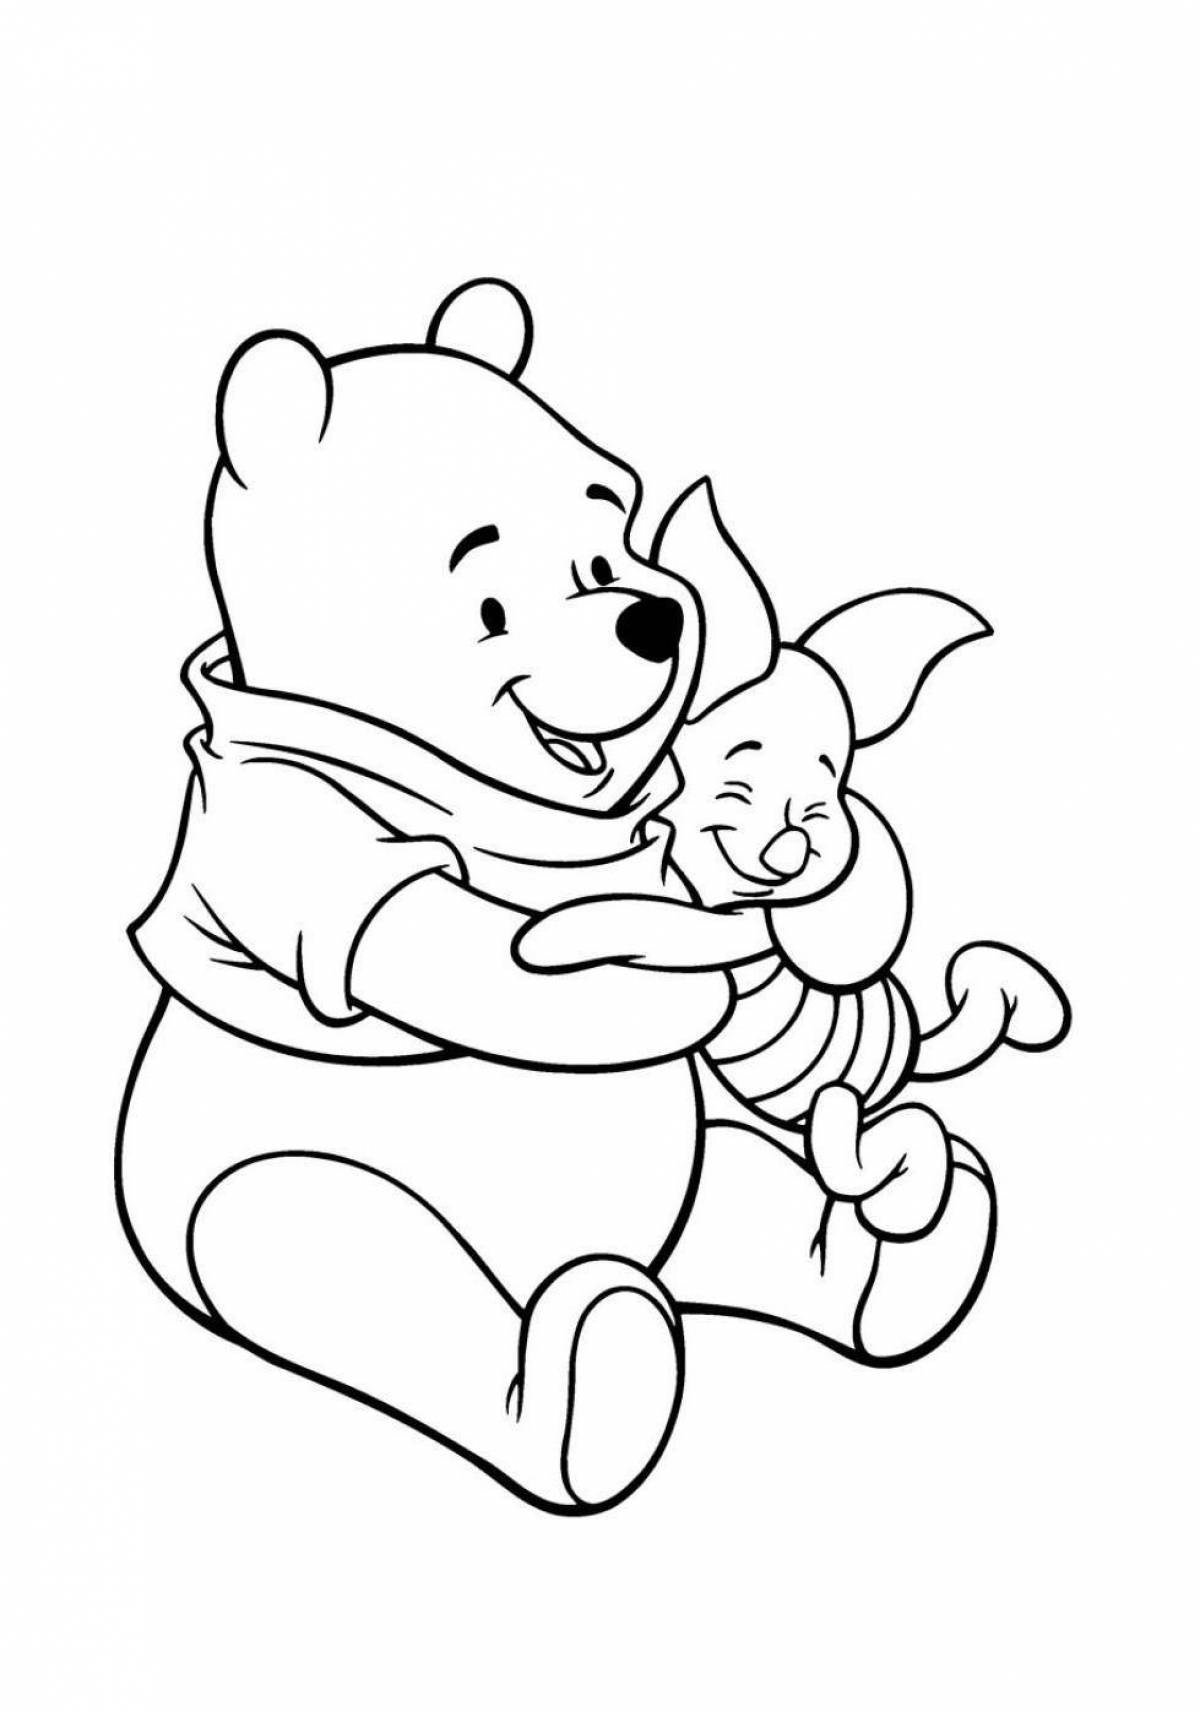 Winnie the Pooh funny coloring book